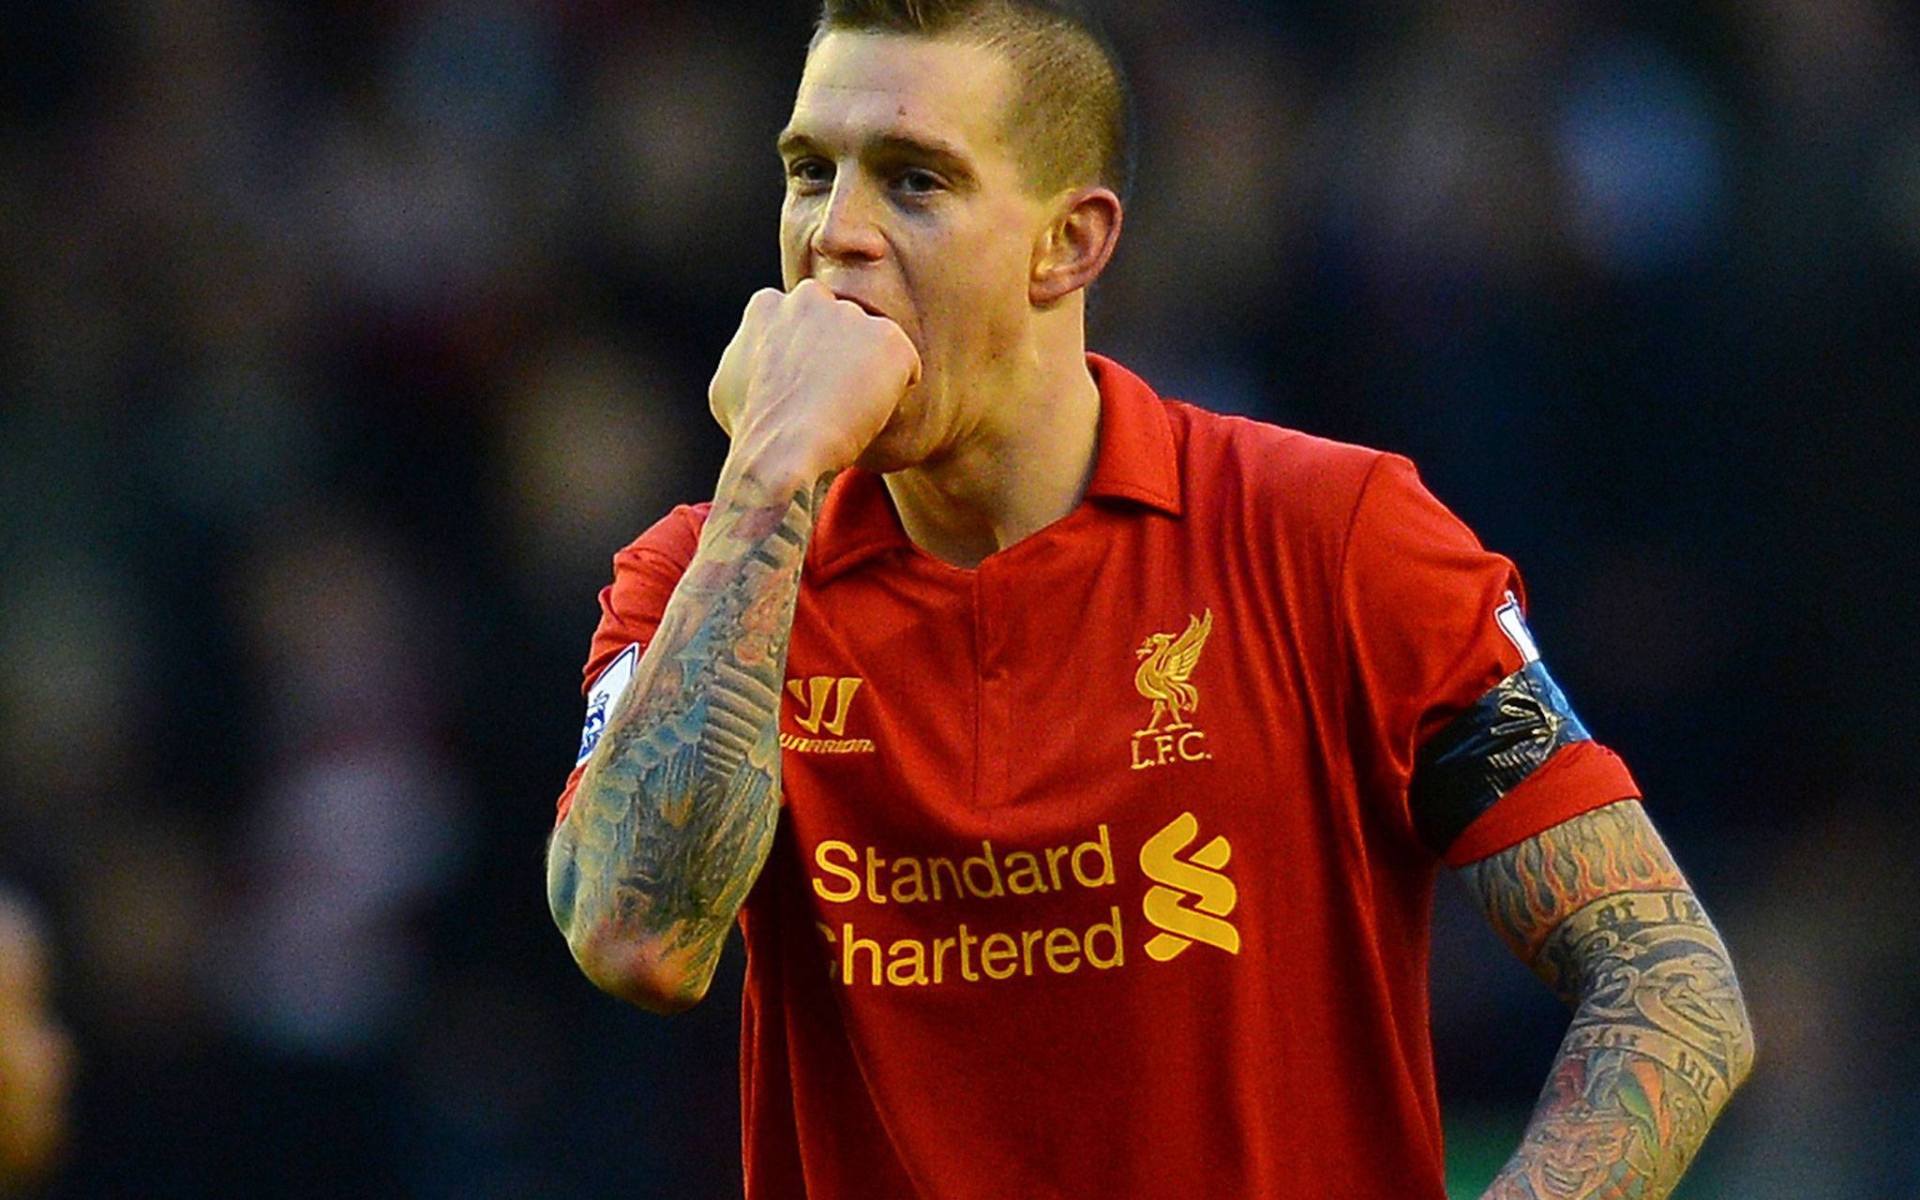 The player of Liverpool Daniel Agger is biting his fist